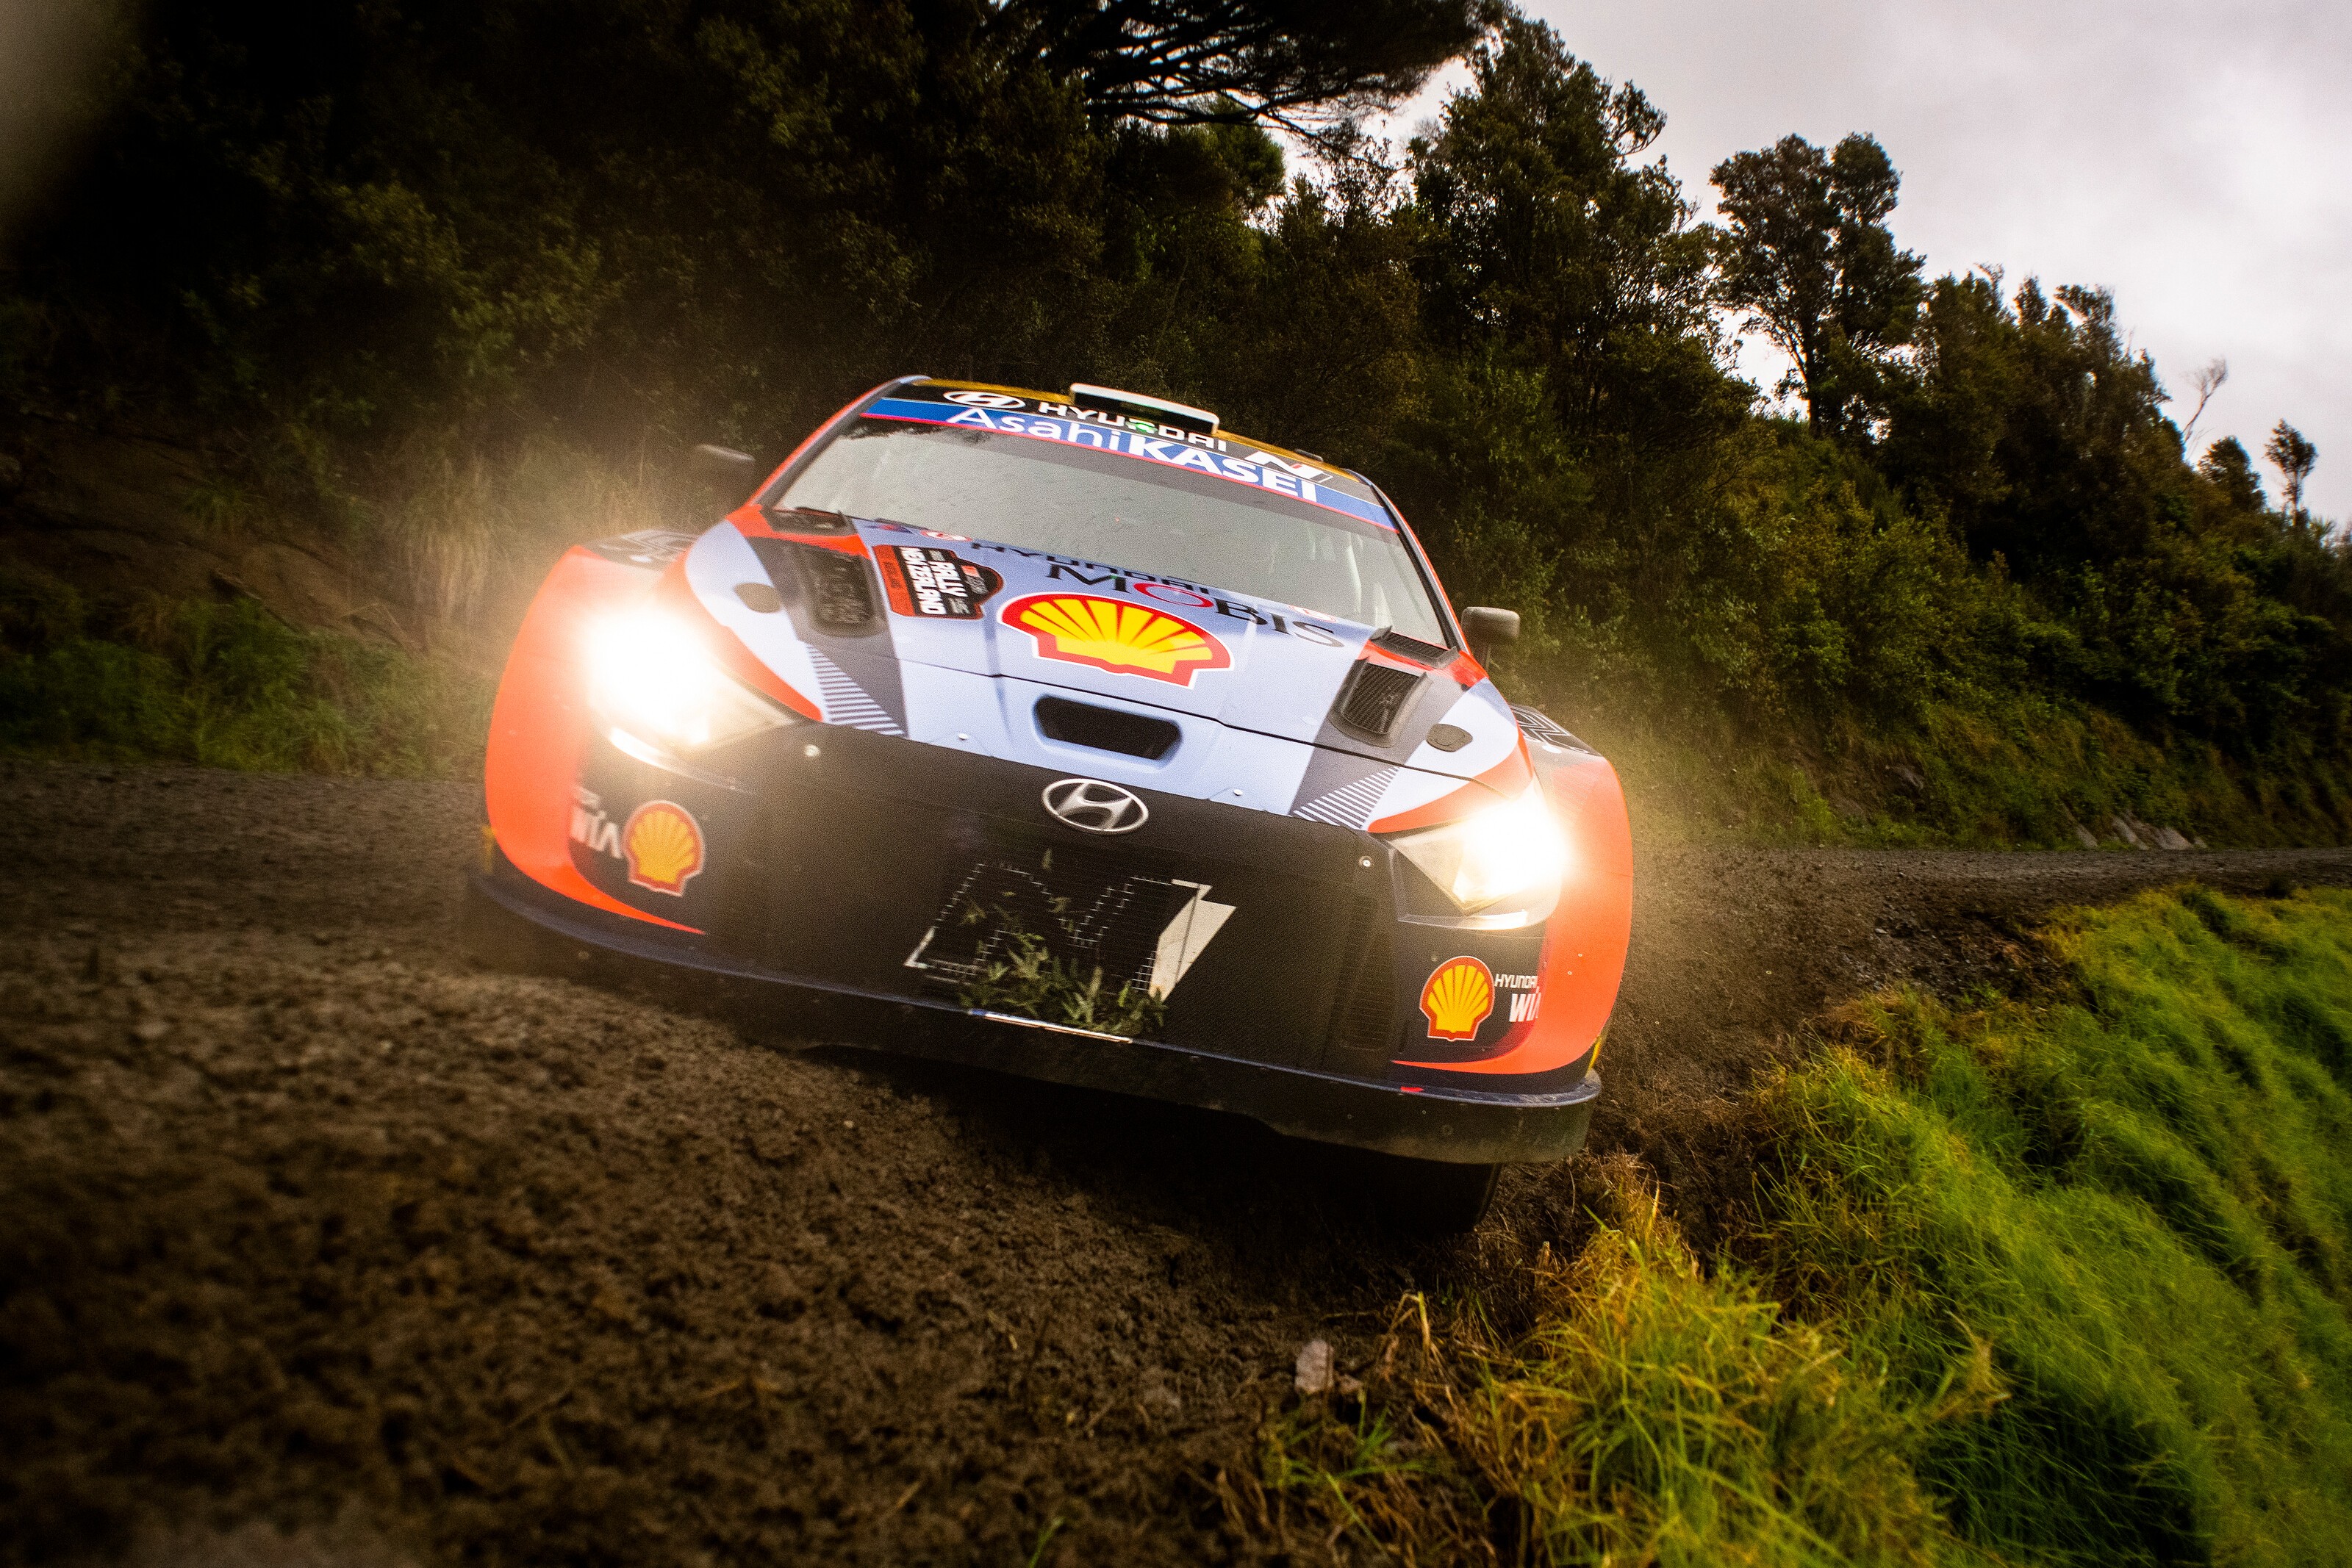 Ott Tanak (EST) Martin Jarveoja (EST) of team Hyundai Shell Mobis are seen performing during the World Rally Championship New Zealand in Auckland, New Zealand on 01 October (photo: Jaanus Ree / Red Bull Content Pool)